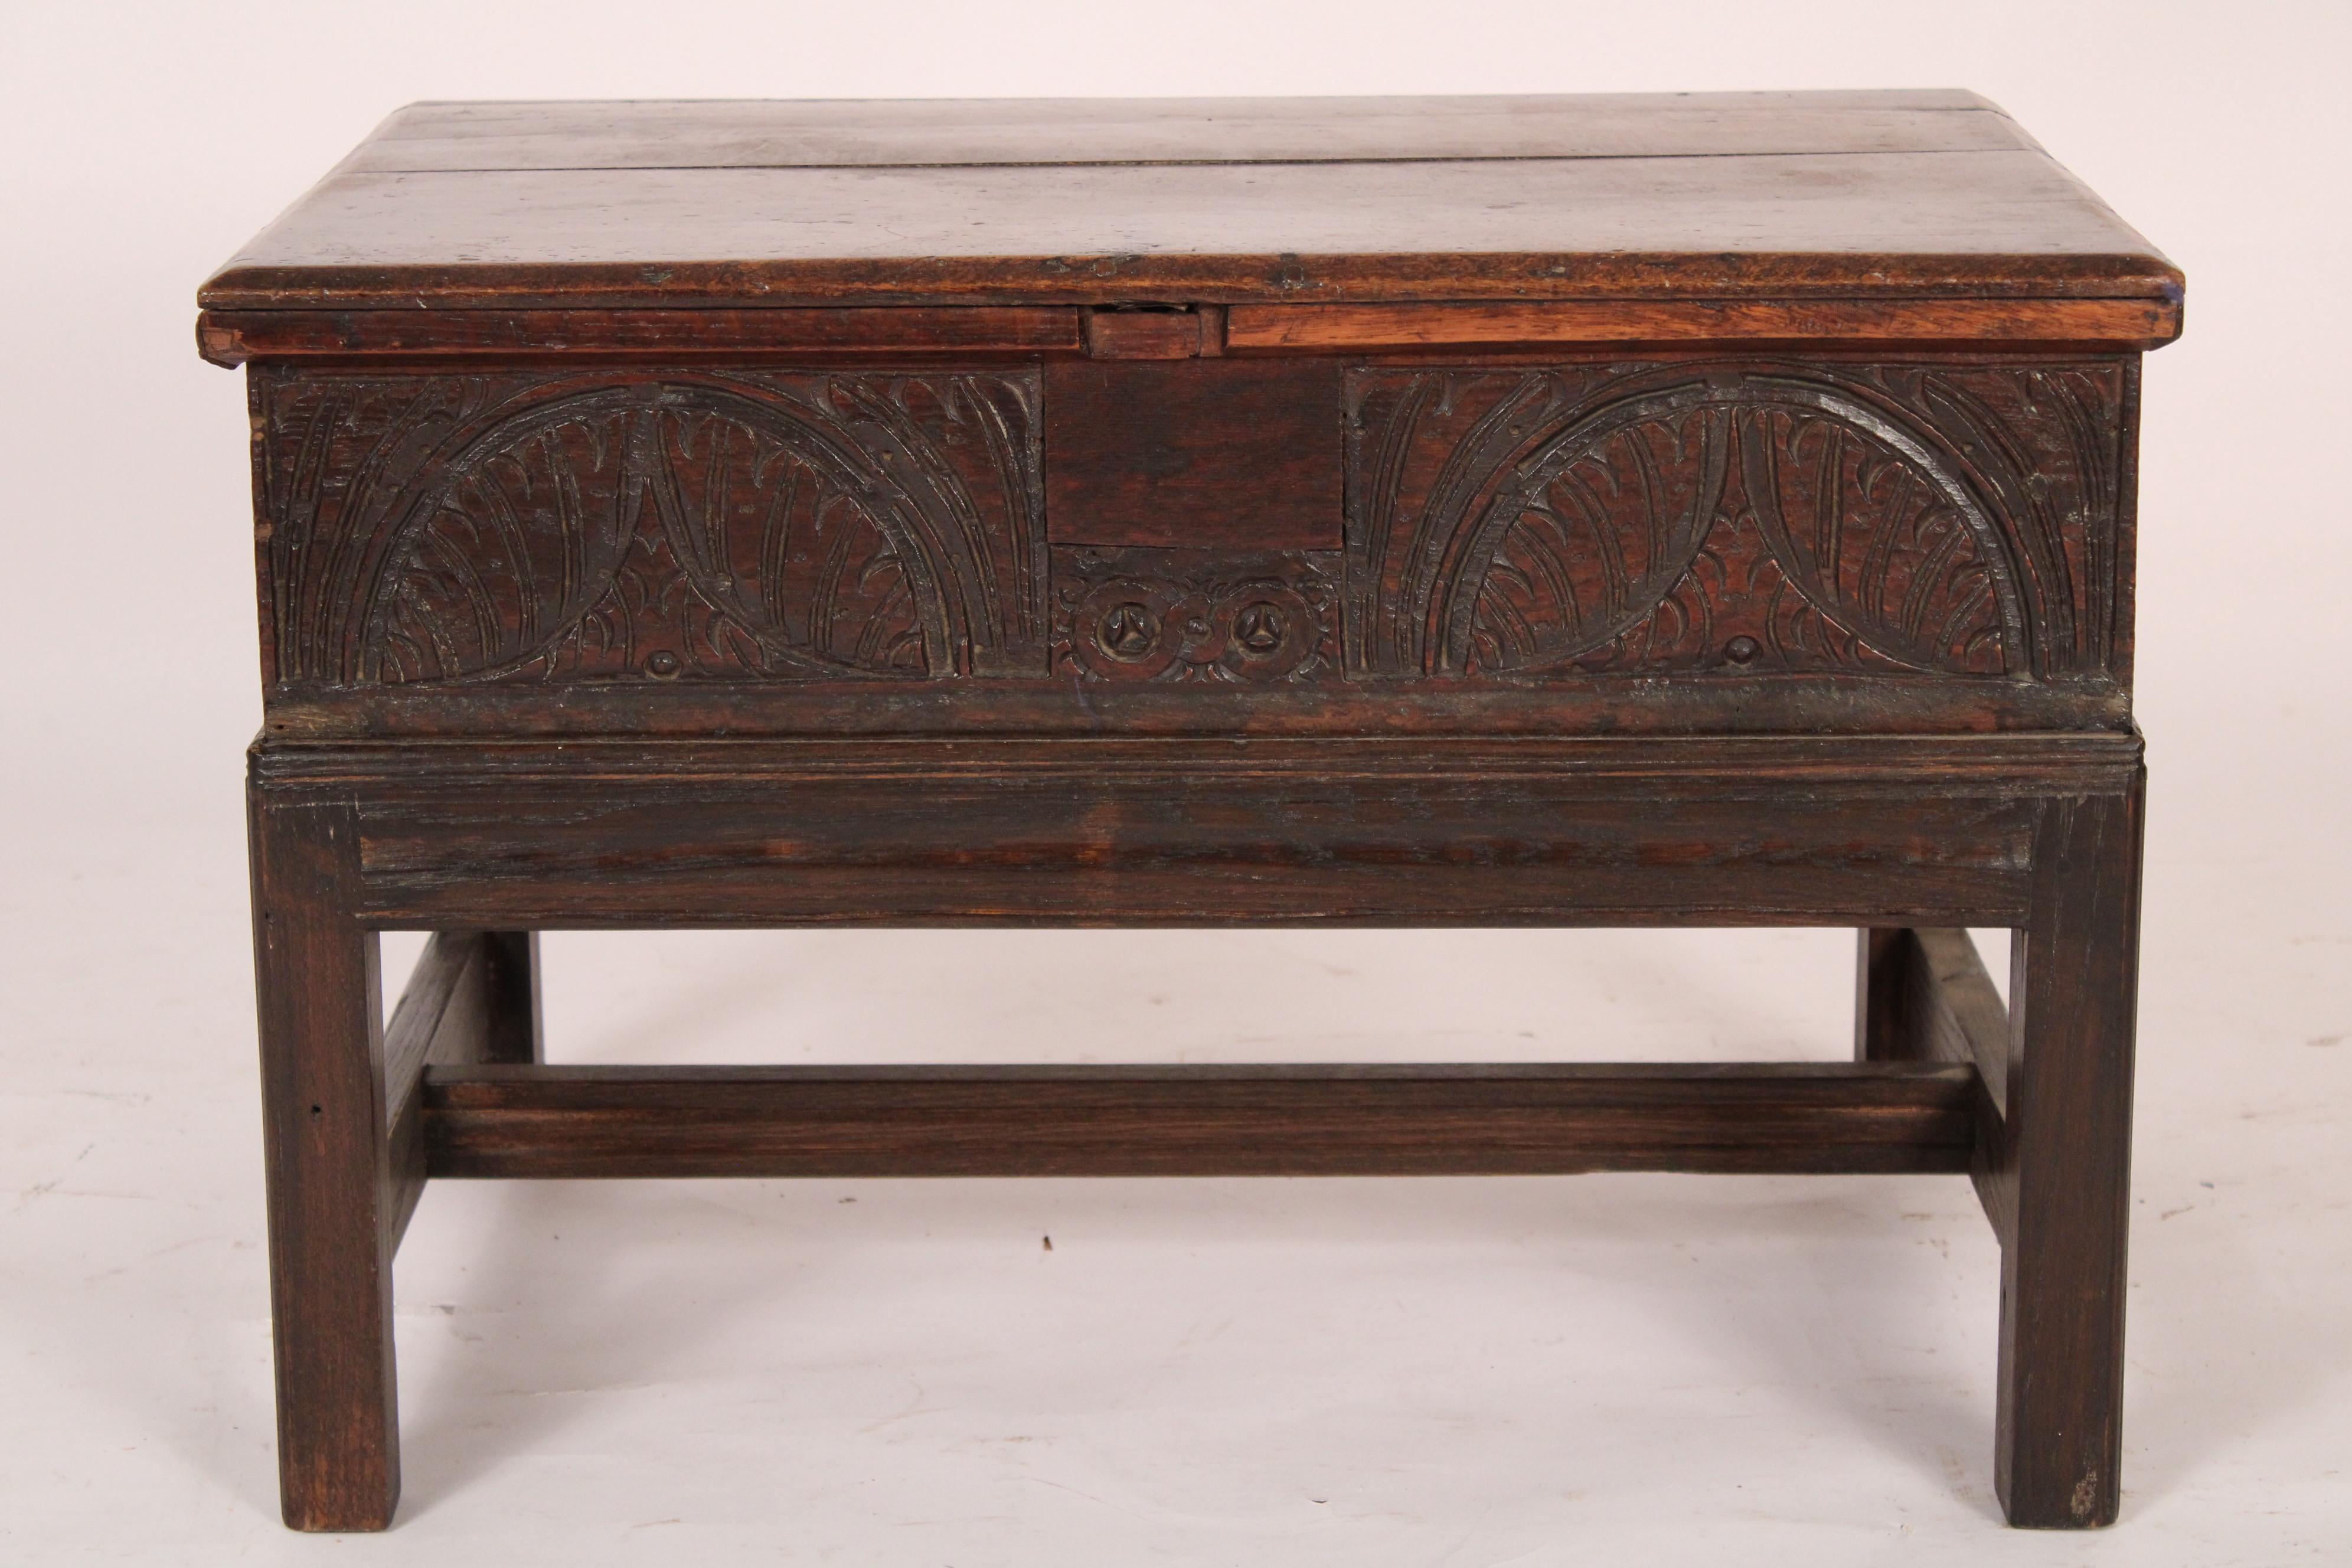 18th century English oak bible box on a 20th century stand. With nice old patina.